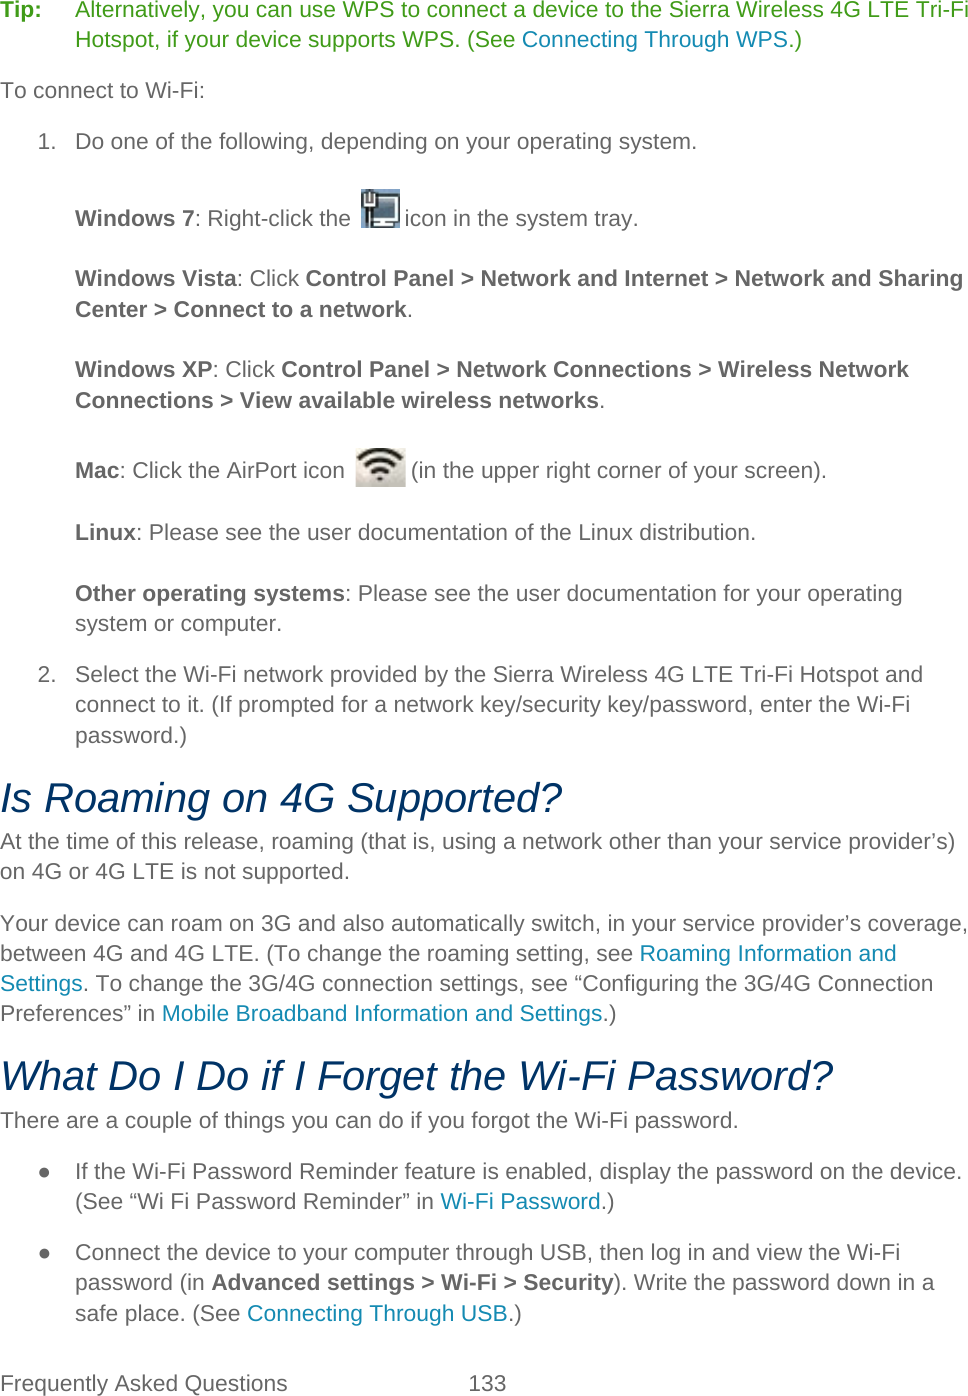 Frequently Asked Questions 133   Tip:   Alternatively, you can use WPS to connect a device to the Sierra Wireless 4G LTE Tri-Fi Hotspot, if your device supports WPS. (See Connecting Through WPS.) To connect to Wi-Fi: 1. Do one of the following, depending on your operating system.  Windows 7: Right-click the   icon in the system tray.  Windows Vista: Click Control Panel &gt; Network and Internet &gt; Network and Sharing Center &gt; Connect to a network.  Windows XP: Click Control Panel &gt; Network Connections &gt; Wireless Network Connections &gt; View available wireless networks.  Mac: Click the AirPort icon   (in the upper right corner of your screen).  Linux: Please see the user documentation of the Linux distribution.  Other operating systems: Please see the user documentation for your operating system or computer. 2. Select the Wi-Fi network provided by the Sierra Wireless 4G LTE Tri-Fi Hotspot and connect to it. (If prompted for a network key/security key/password, enter the Wi-Fi password.) Is Roaming on 4G Supported? At the time of this release, roaming (that is, using a network other than your service provider’s) on 4G or 4G LTE is not supported. Your device can roam on 3G and also automatically switch, in your service provider’s coverage, between 4G and 4G LTE. (To change the roaming setting, see Roaming Information and Settings. To change the 3G/4G connection settings, see “Configuring the 3G/4G Connection Preferences” in Mobile Broadband Information and Settings.) What Do I Do if I Forget the Wi-Fi Password? There are a couple of things you can do if you forgot the Wi-Fi password. ● If the Wi-Fi Password Reminder feature is enabled, display the password on the device. (See “Wi Fi Password Reminder” in Wi-Fi Password.) ● Connect the device to your computer through USB, then log in and view the Wi-Fi password (in Advanced settings &gt; Wi-Fi &gt; Security). Write the password down in a safe place. (See Connecting Through USB.) 